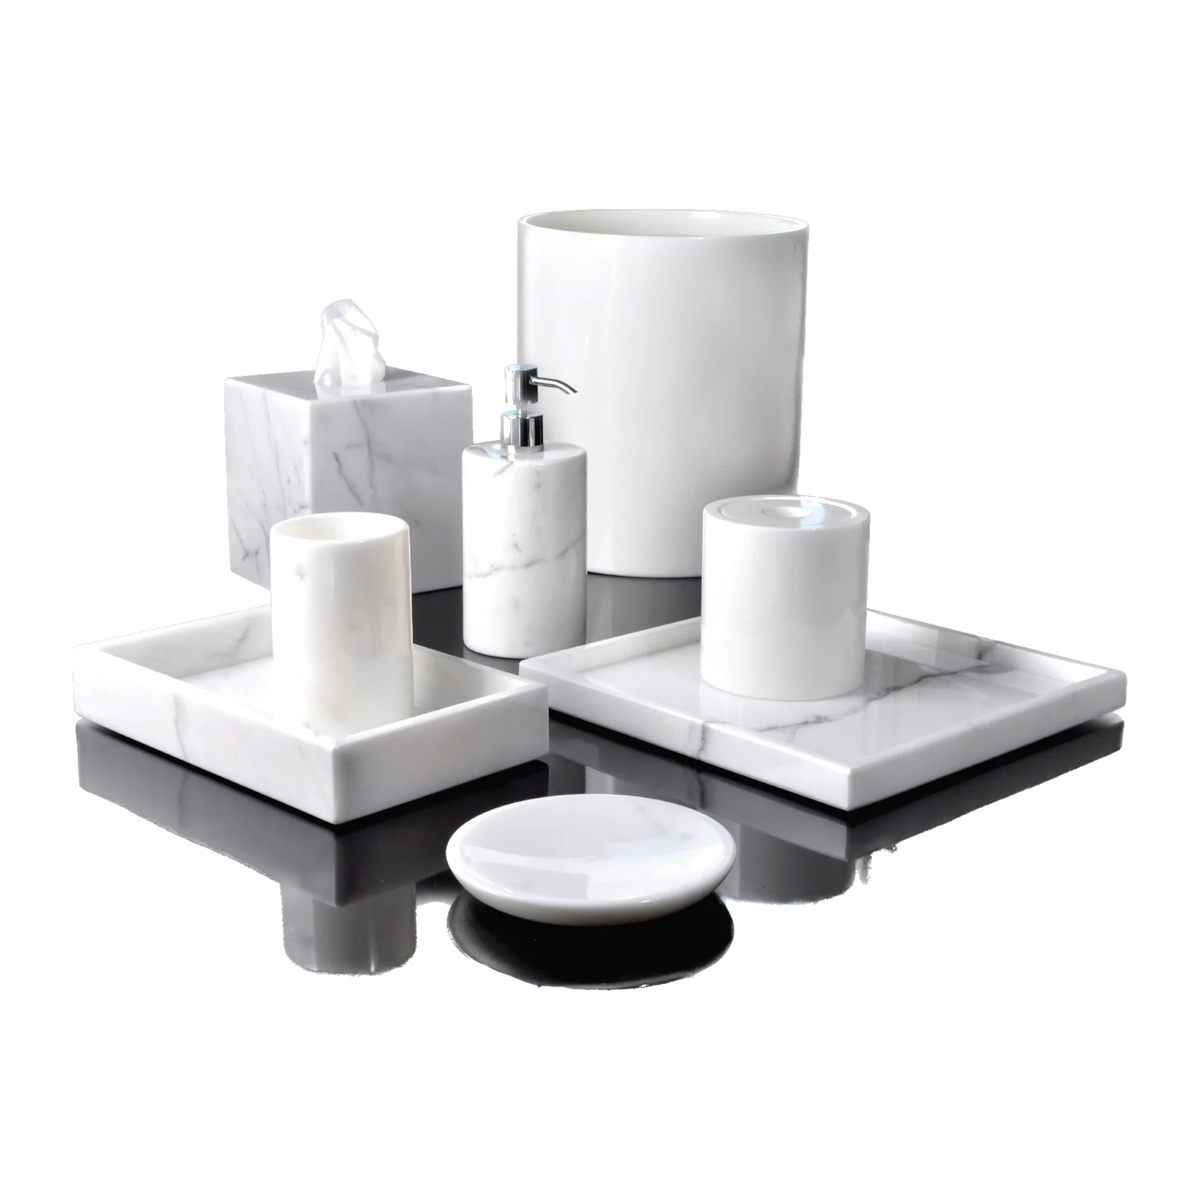 Mike and Ally Statuario Marble Bath Accessories Collection